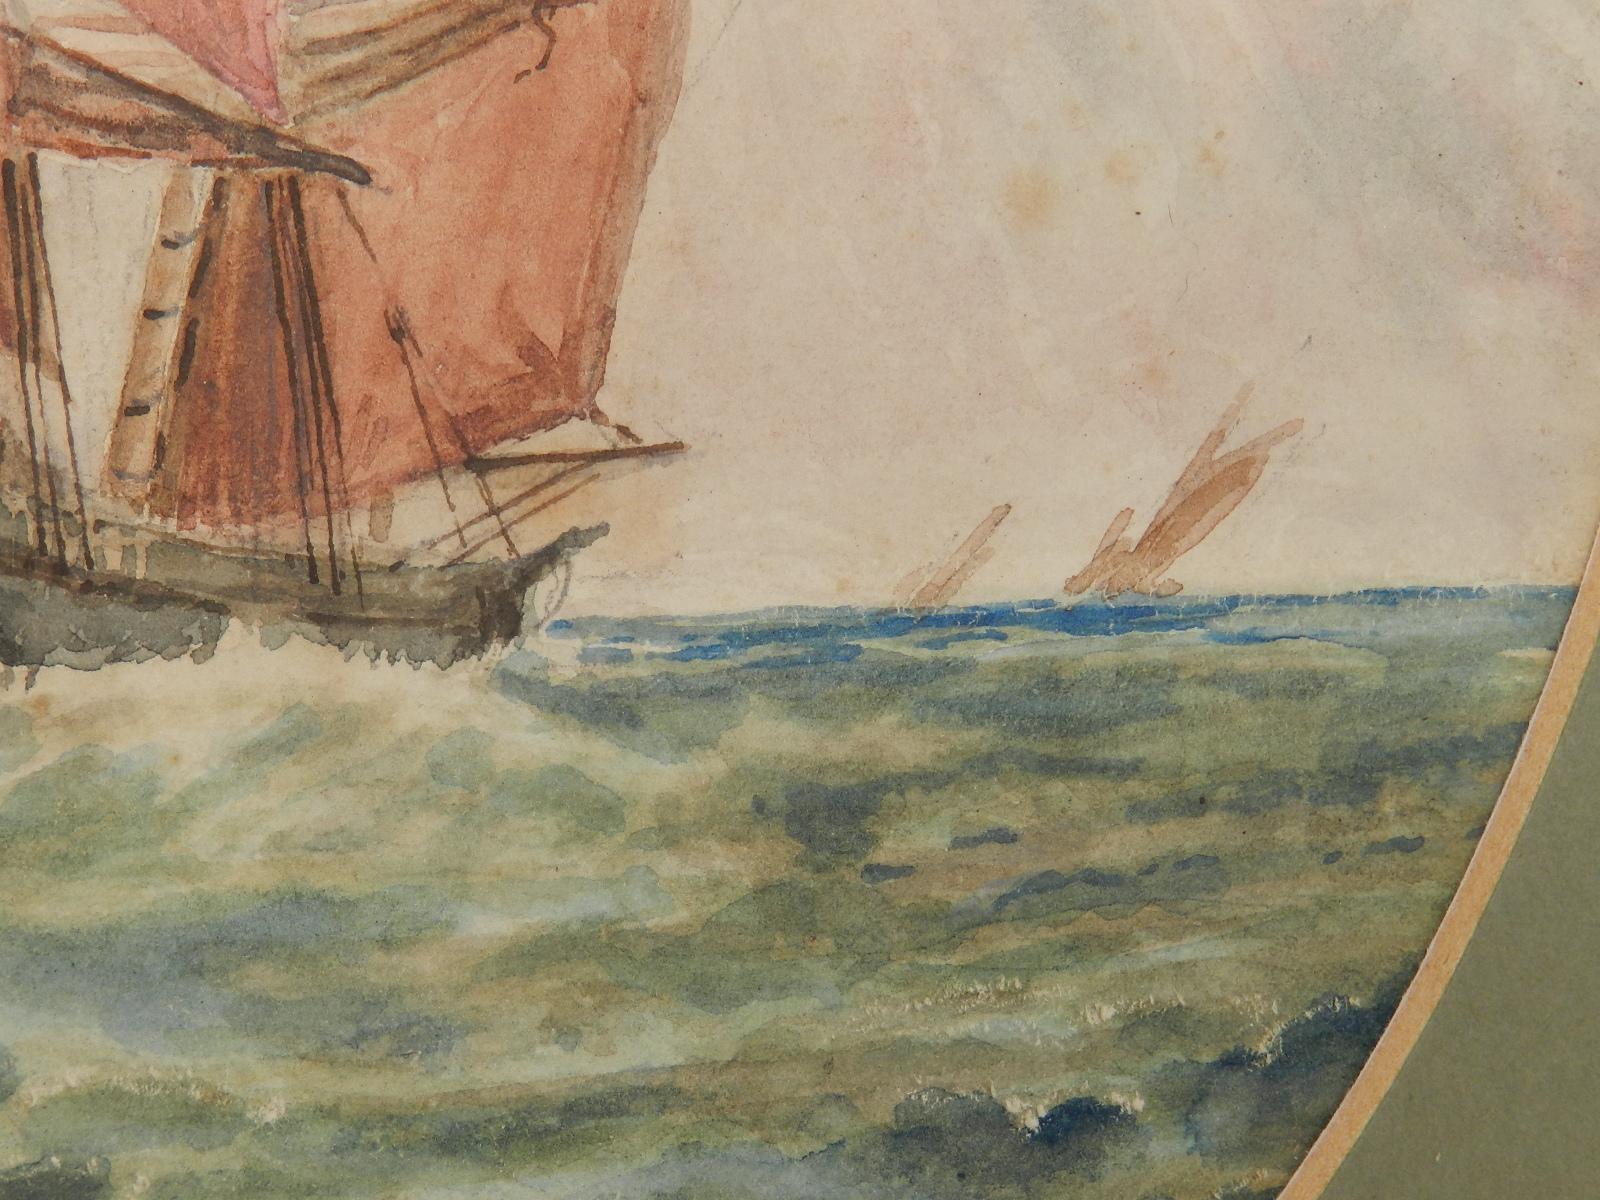 Watercolor Sketch Sailing Ship at Sea English Marine by John Moore late 19th Cen - Brown Landscape Art by Unknown